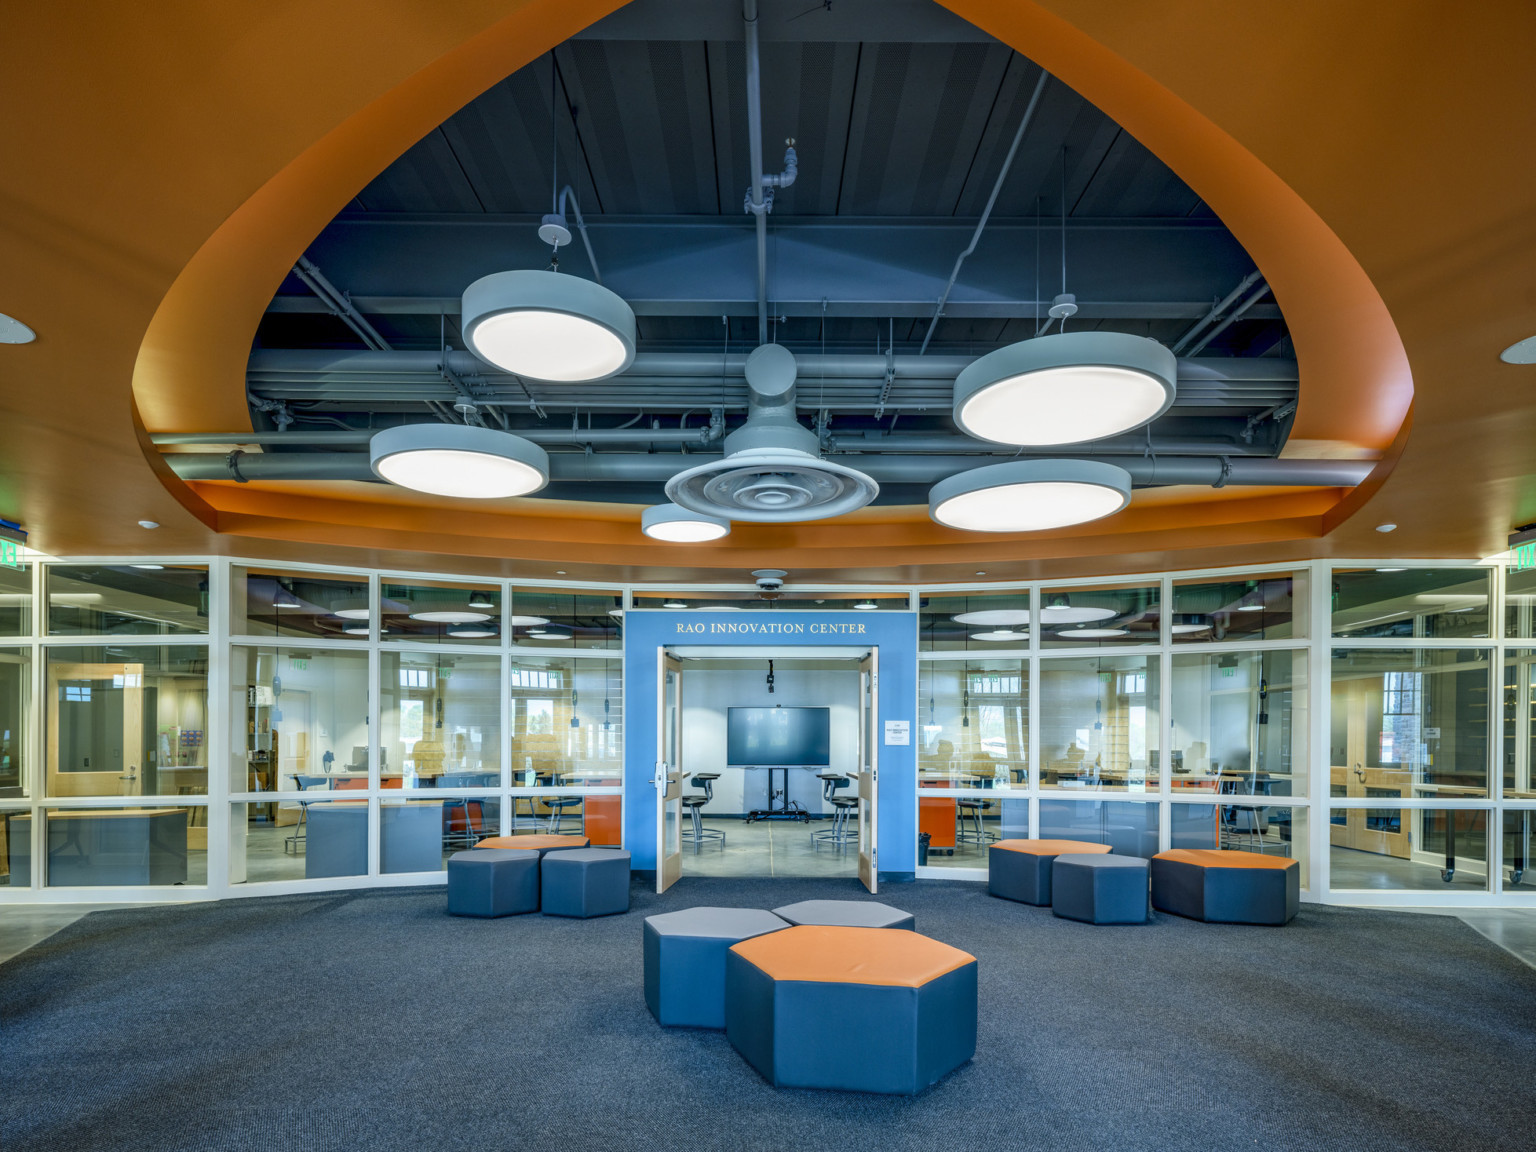 Abstract orange drop ceiling detail with cut out with exposed ducts and round pendant lamps. Flexible seating in common area